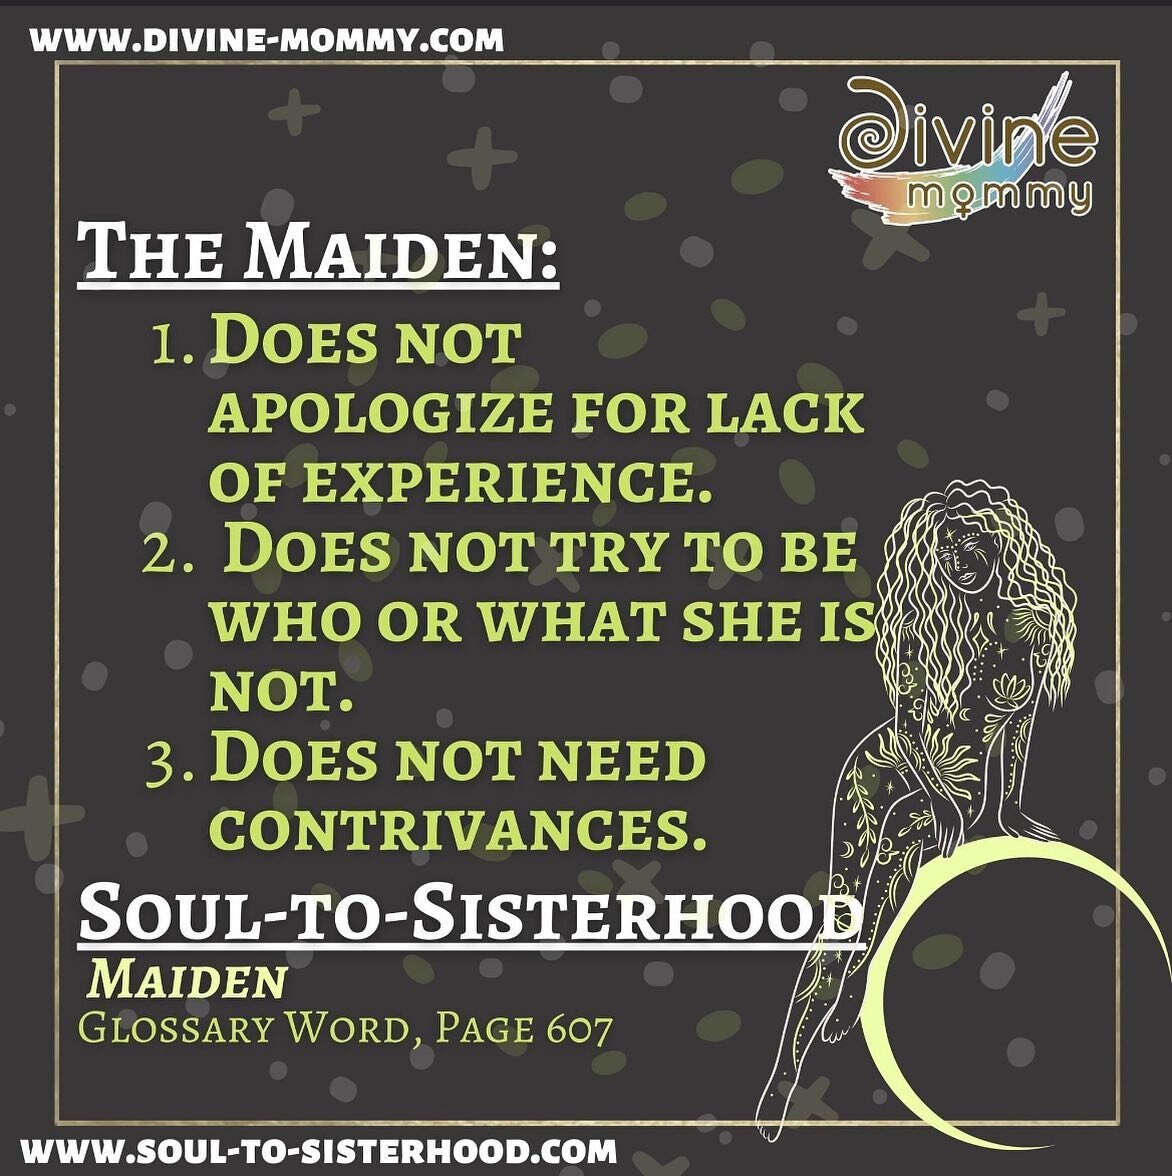 Happy #mondaymantra Sisters. 😘
Enjoy these fierce Maiden energies today.
As we feel the Mother energies entering in mid-week, more softness and desires for nurturing ourselves and others will come through. 
Have a Marvelous &amp; Magickal Monday!
❤️